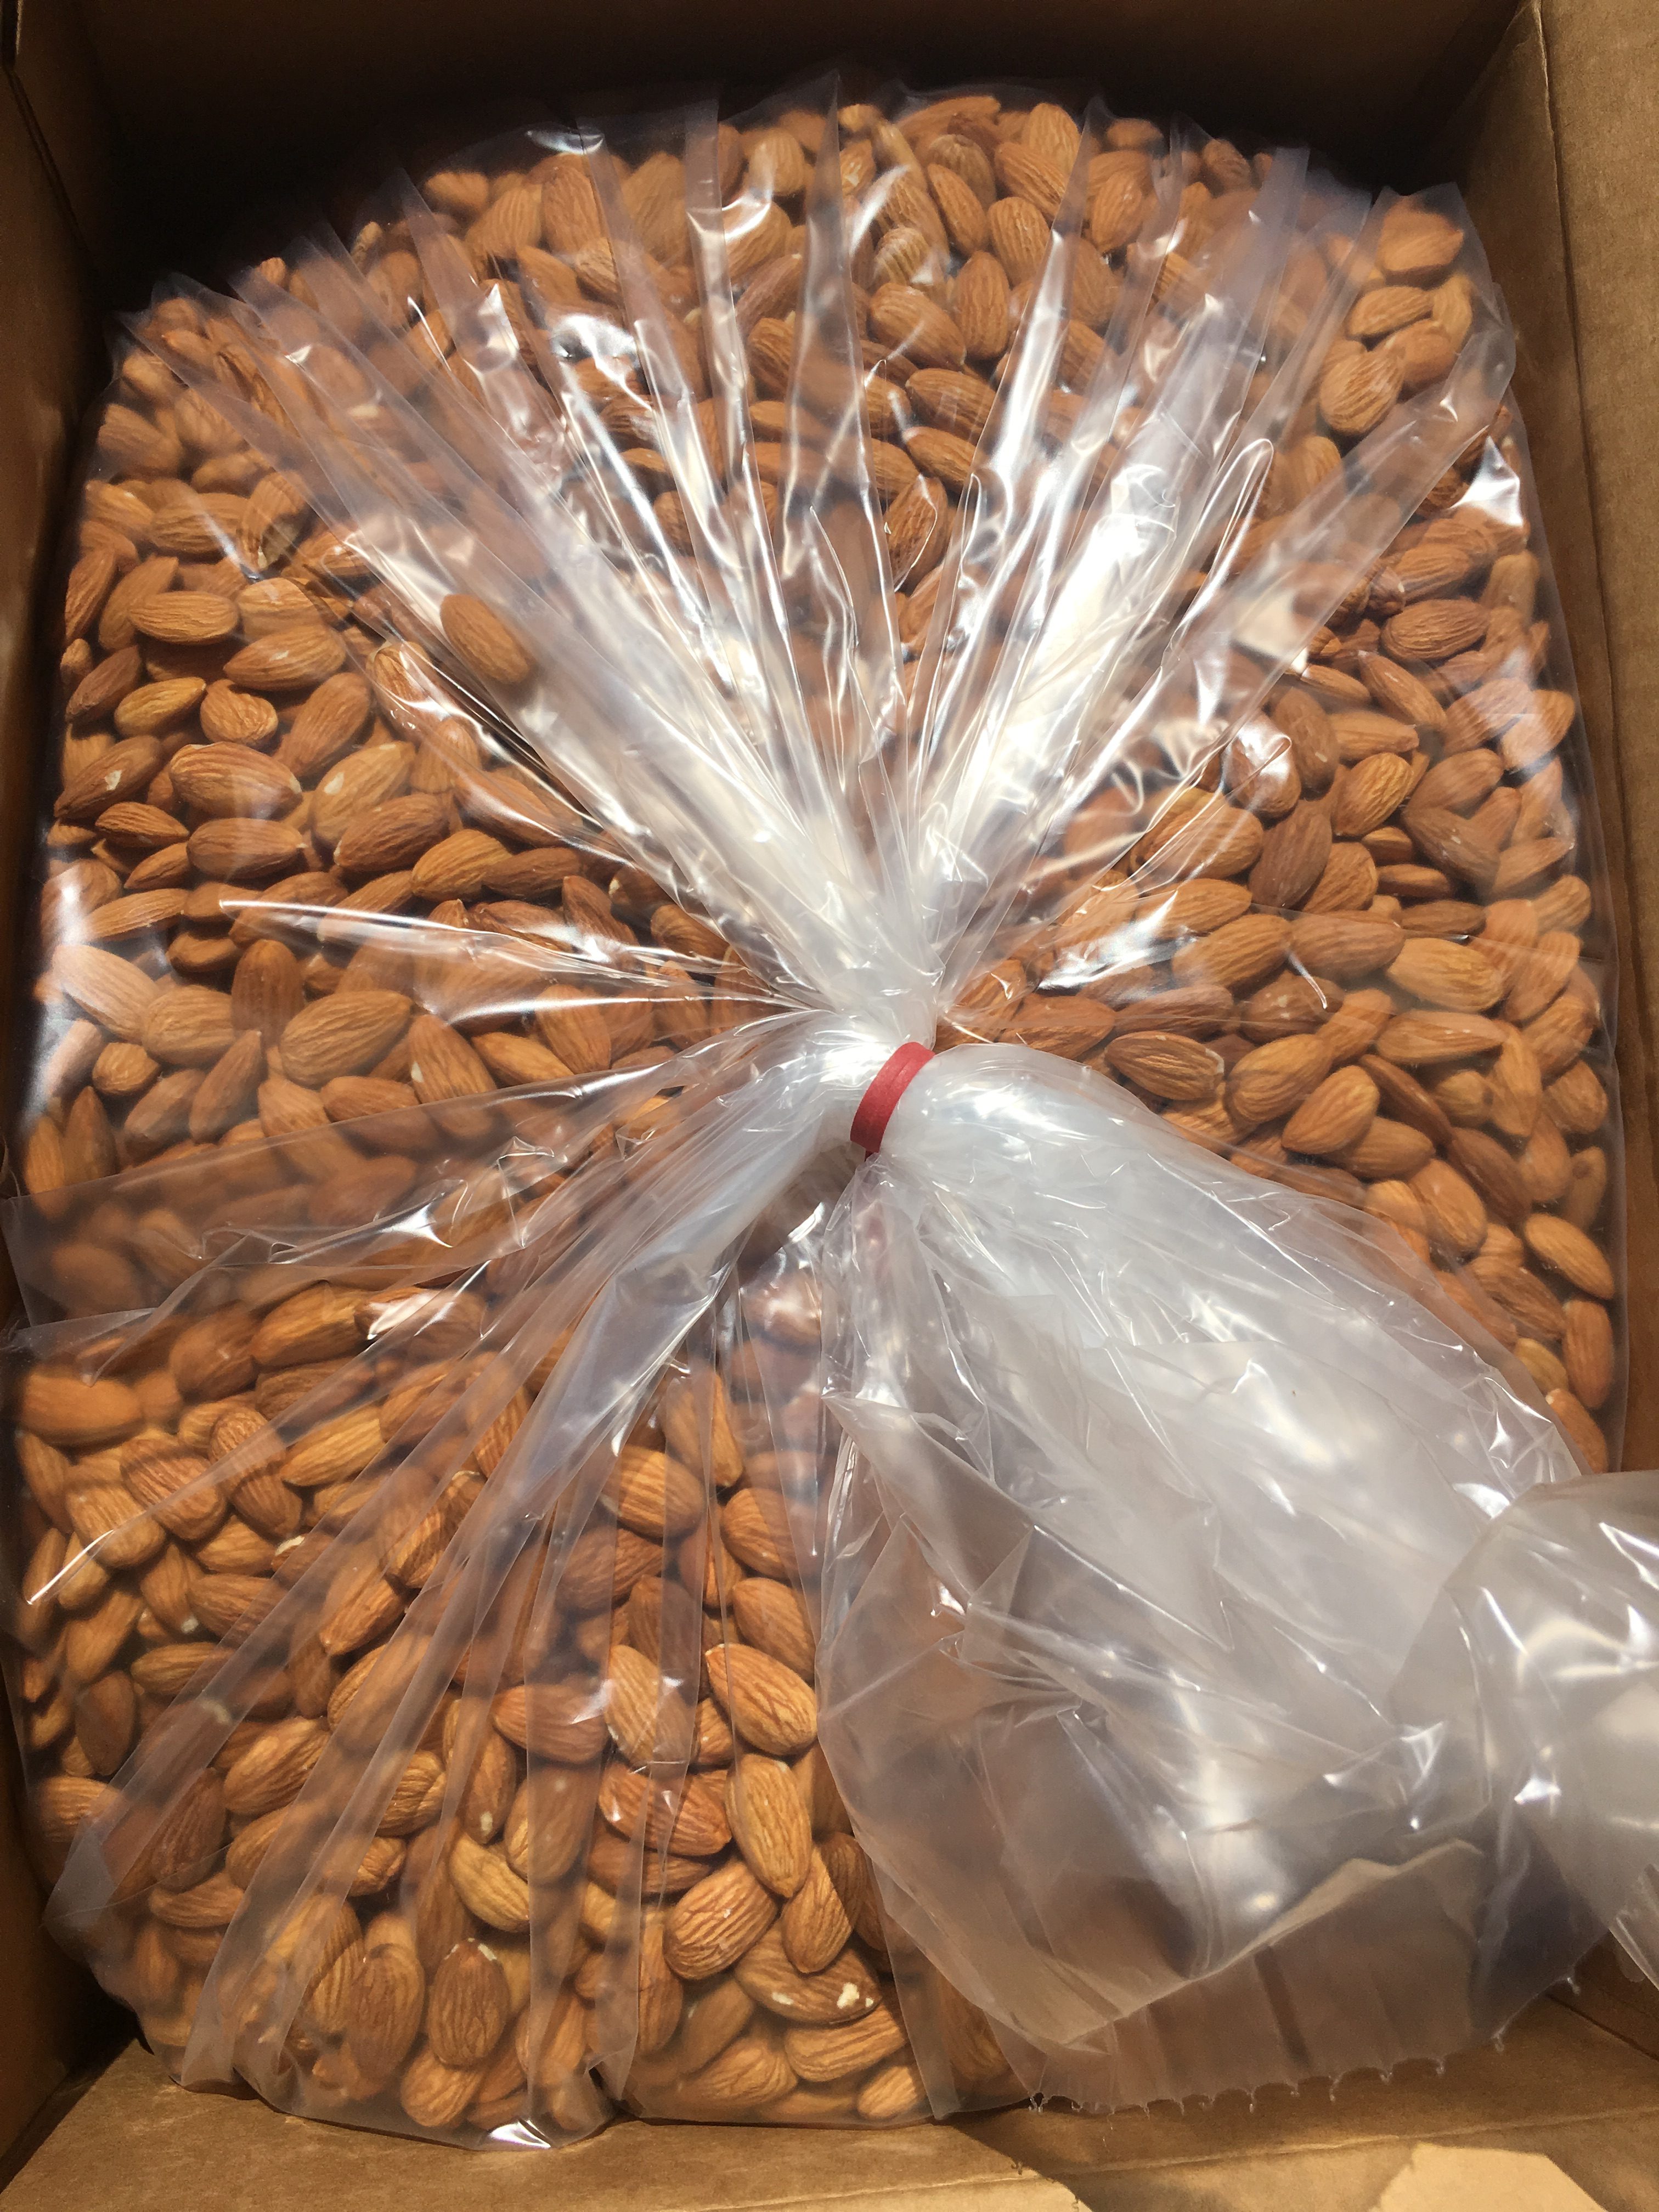 Organic Unpasteurized Almonds 20 Pounds- FREE SHIPPING!